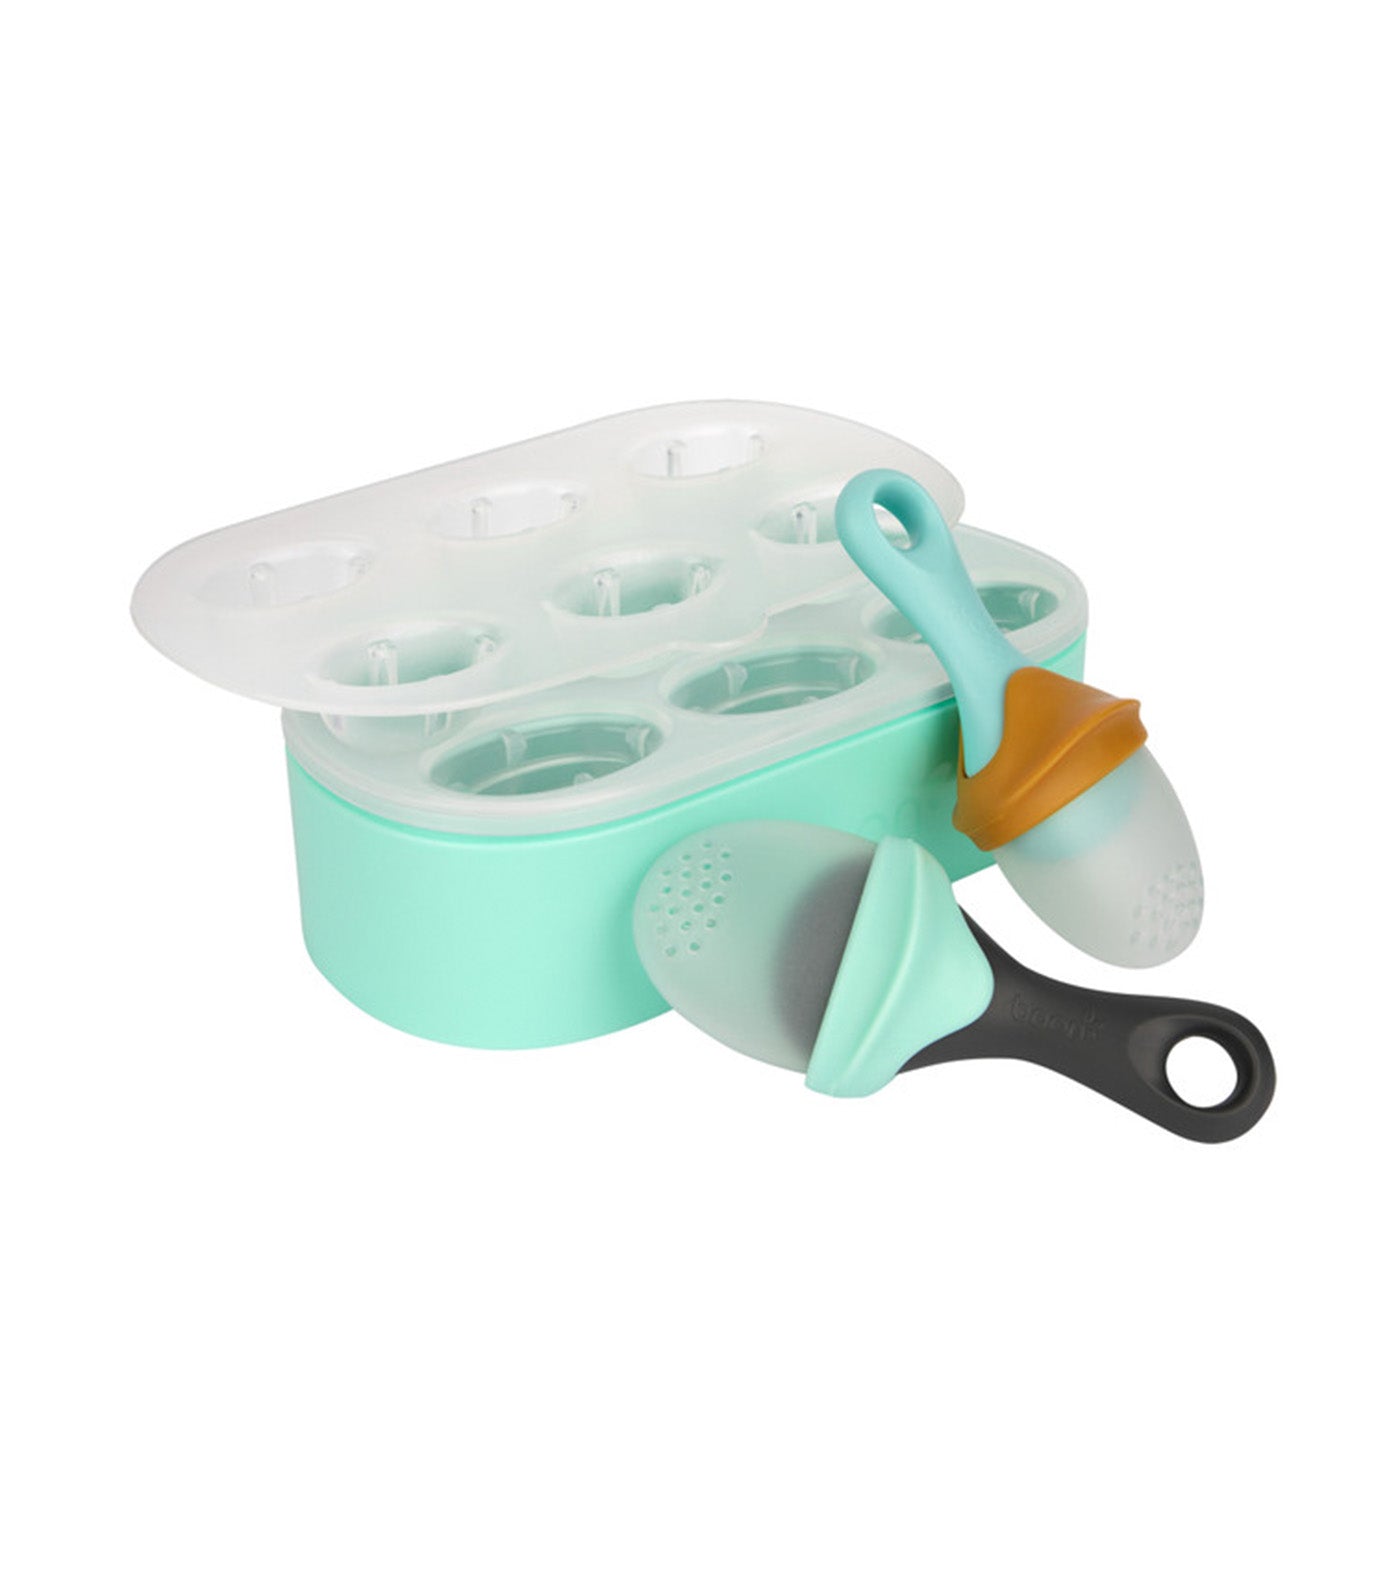 PULP Popsicle and Freezer Tray